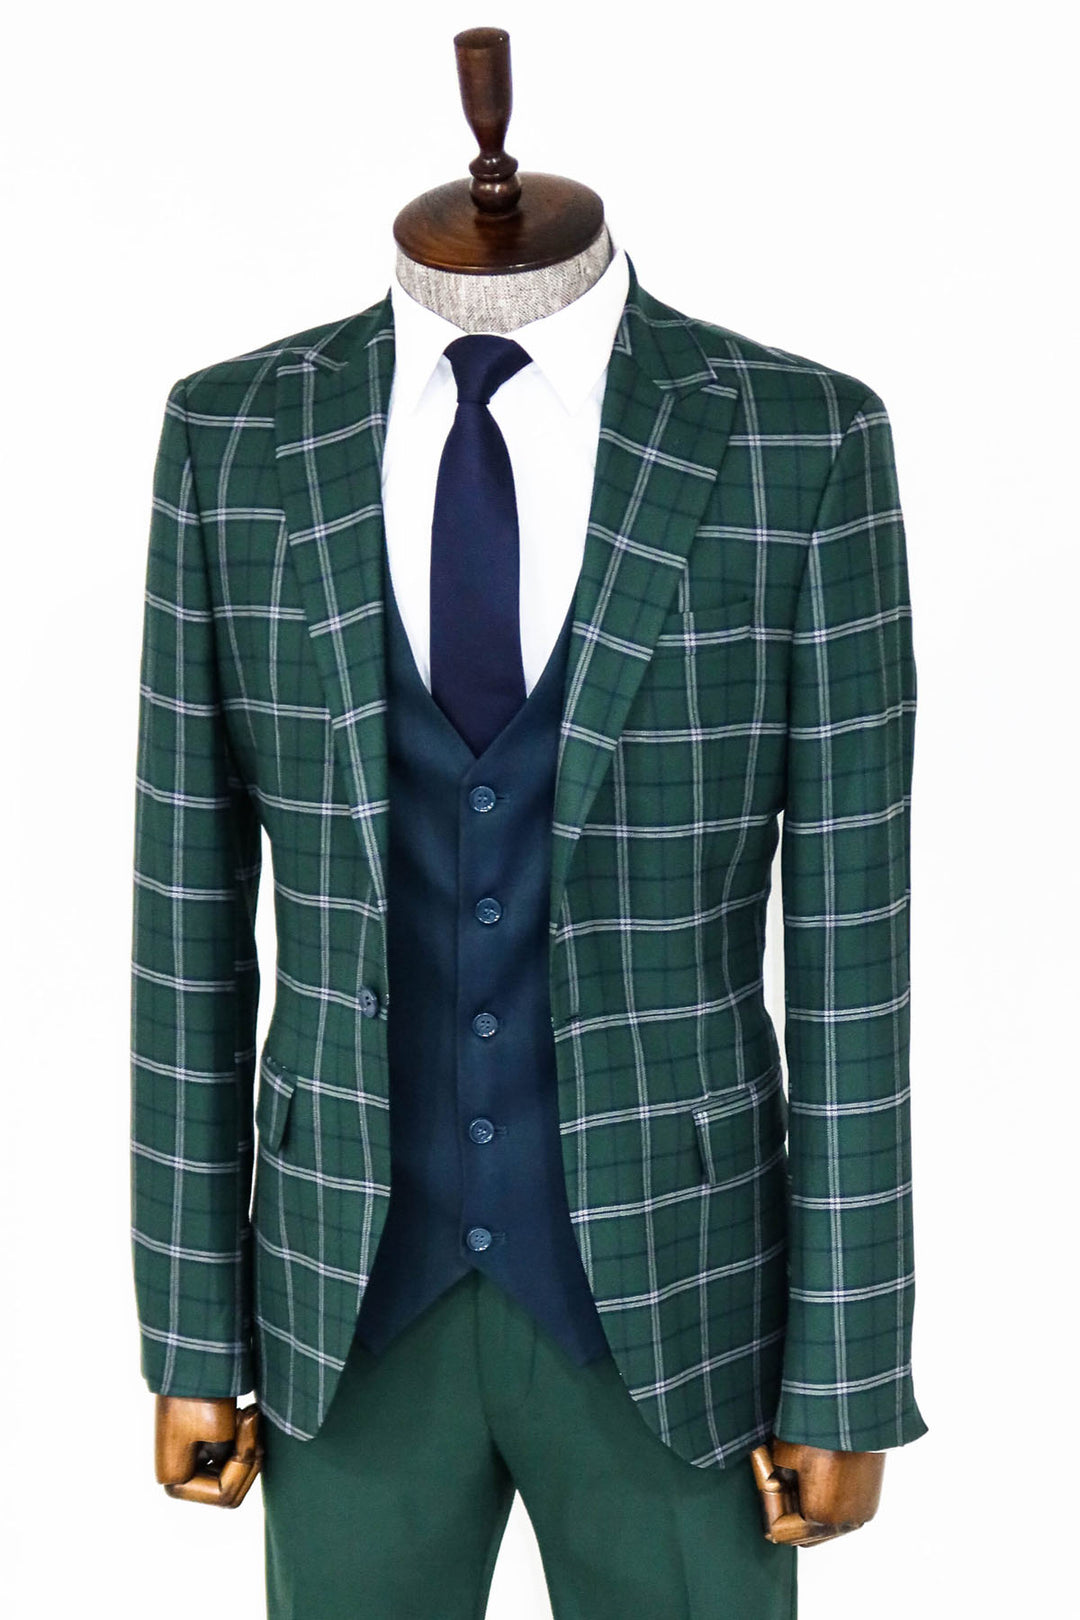 Blue Vested Slim Fit Checked Green Men Suit and Shirt Combination- Wessi